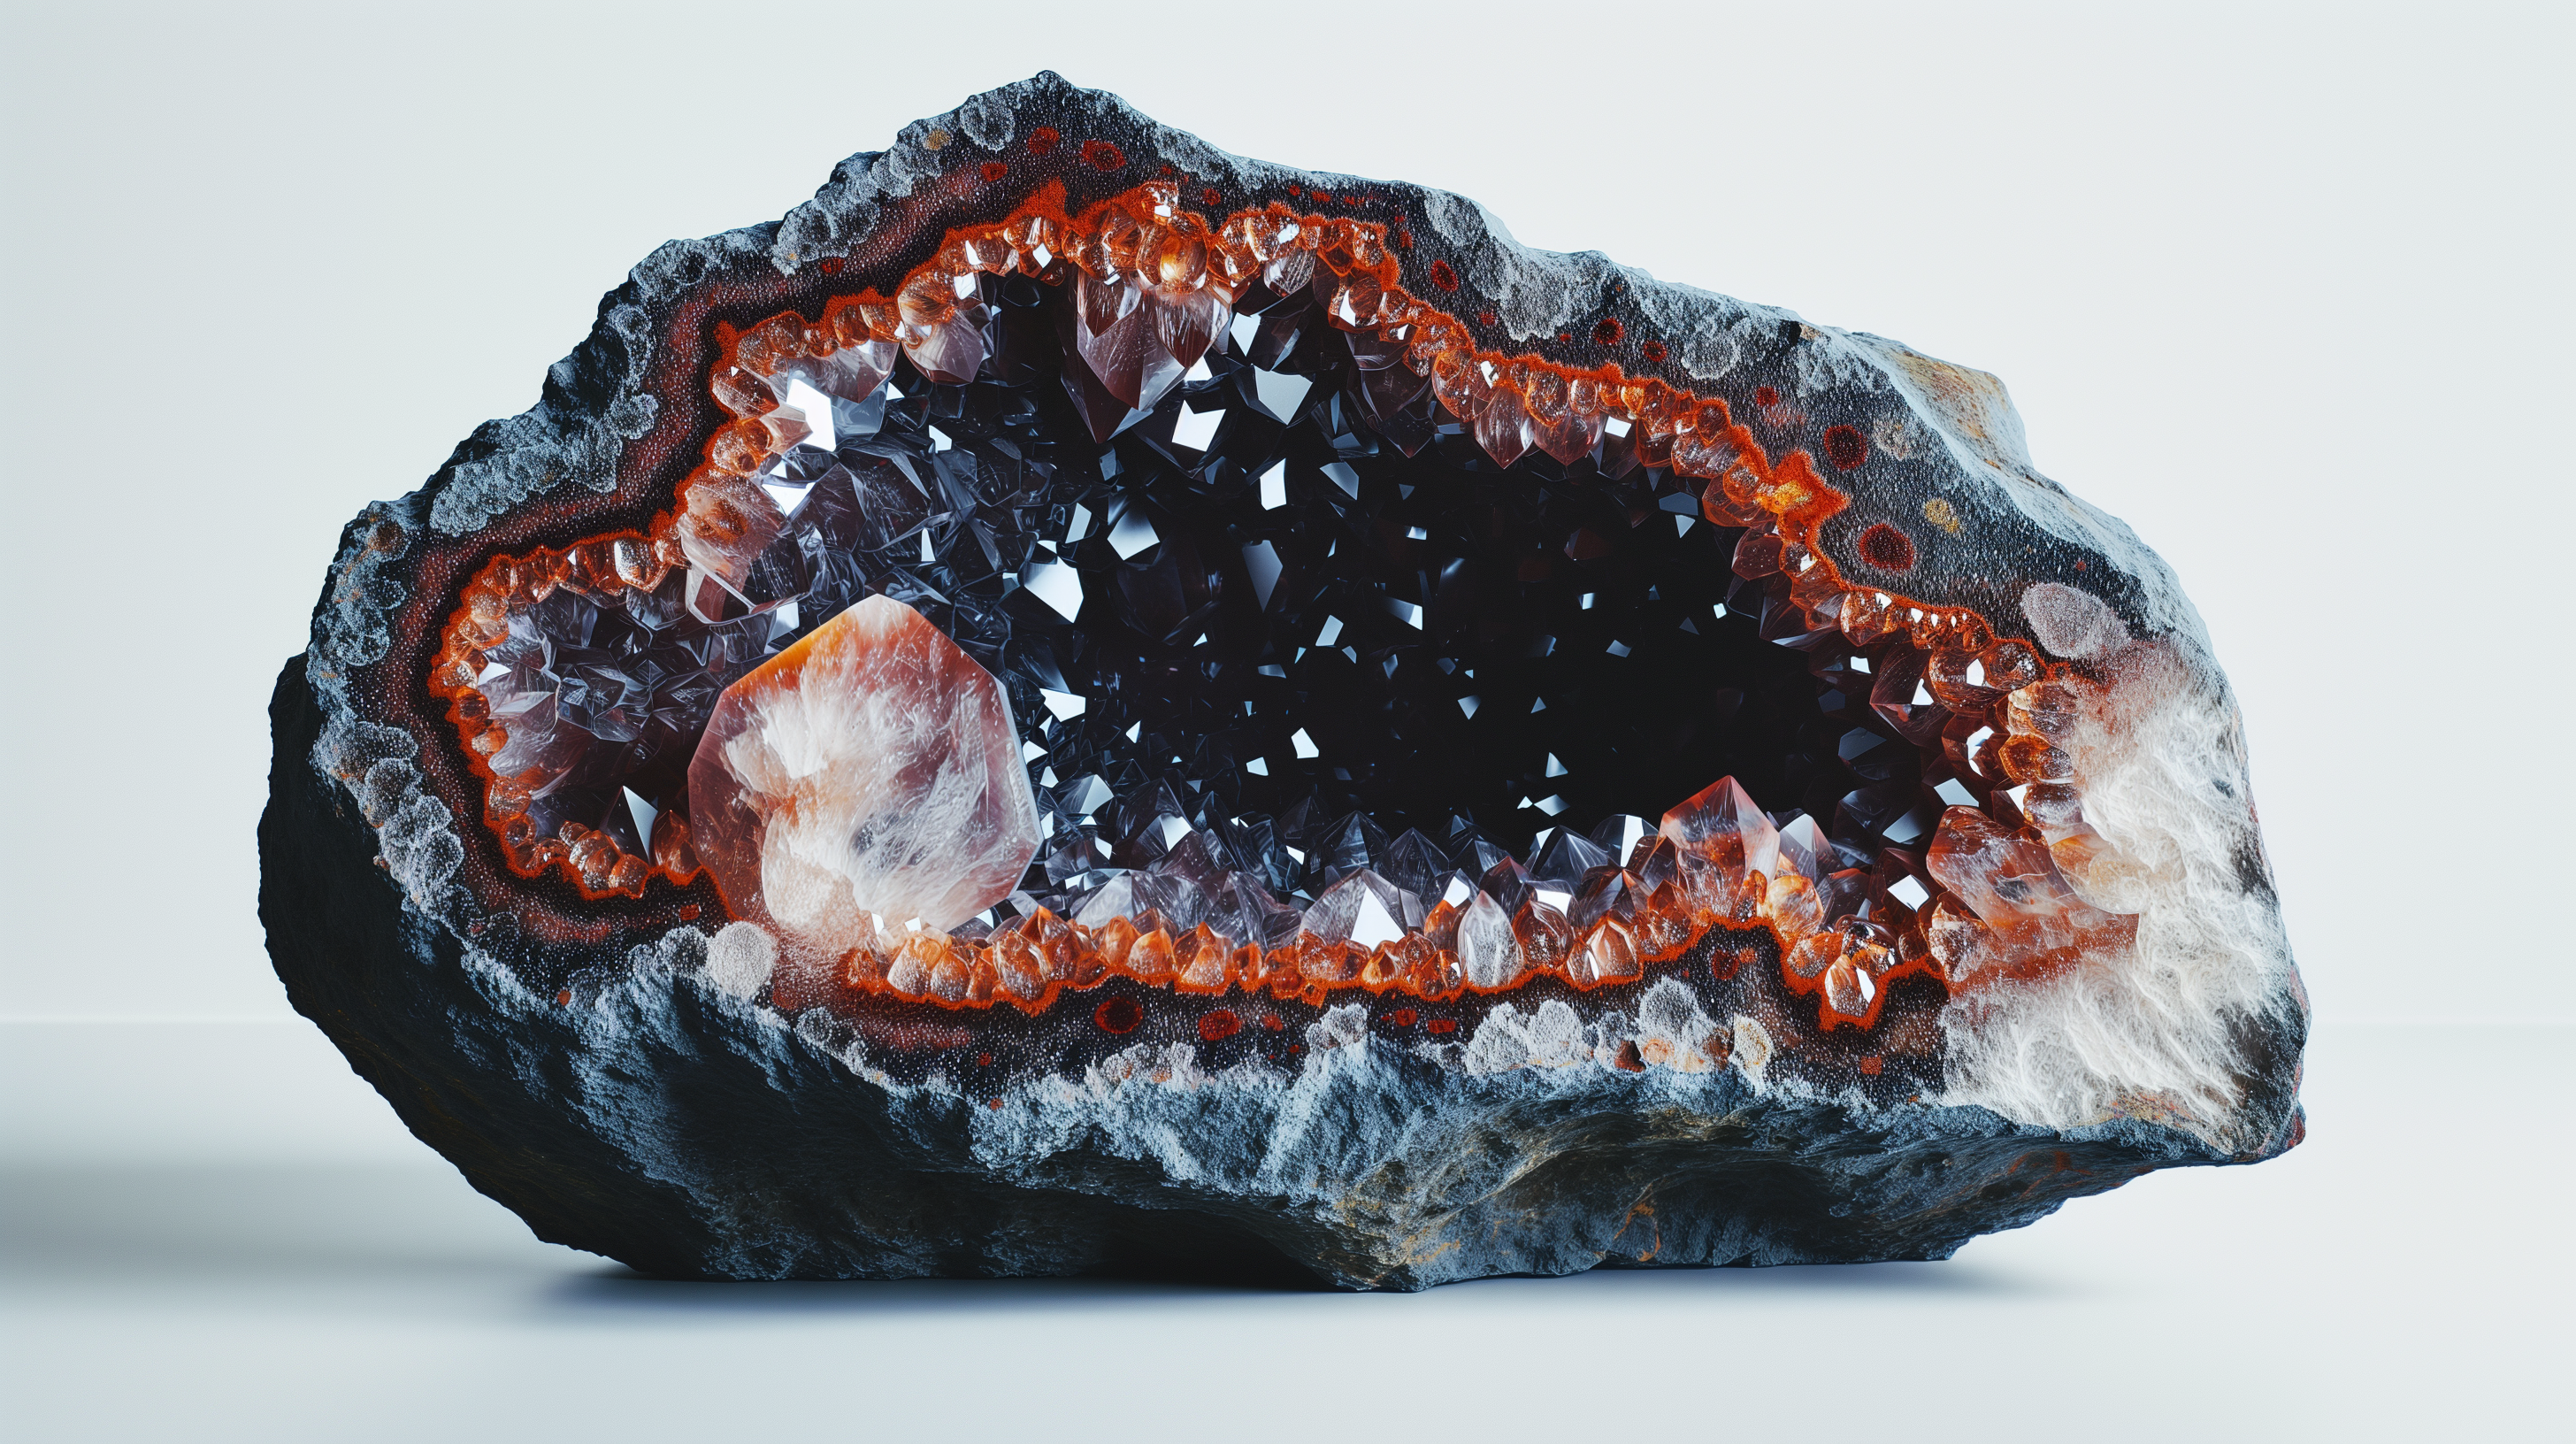 HD wallpaper of a stunning geode with vibrant orange crystals and deep black center, perfect for desktop background.